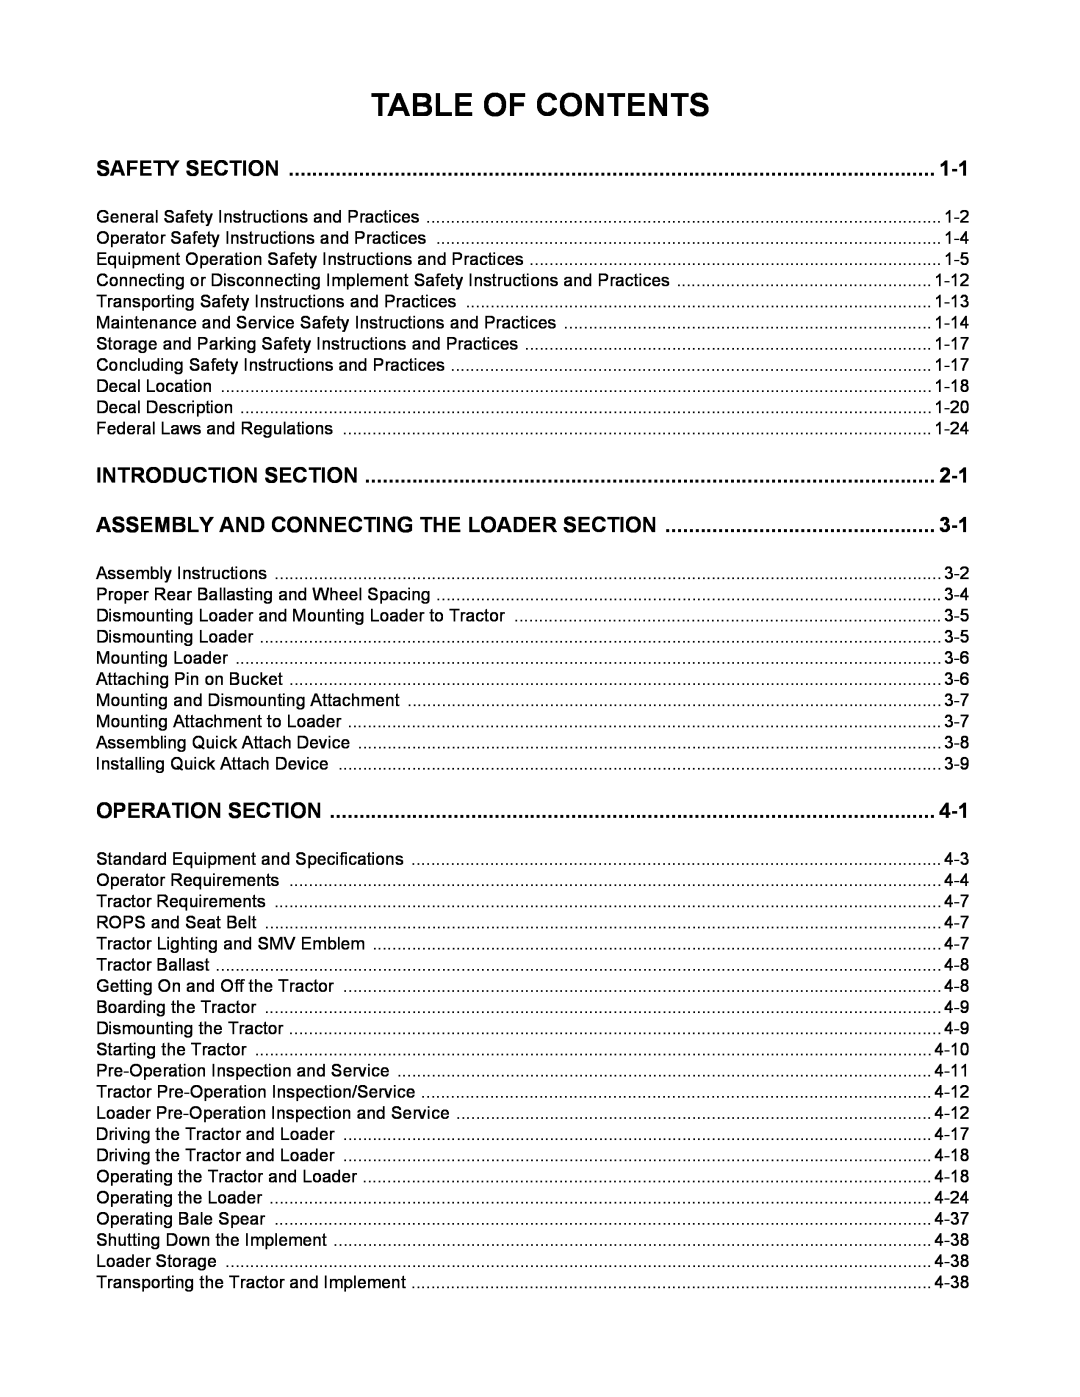 Servis-Rhino 4211 Table Of Contents, Safety Section, Introduction Section, Assembly And Connecting The Loader Section 